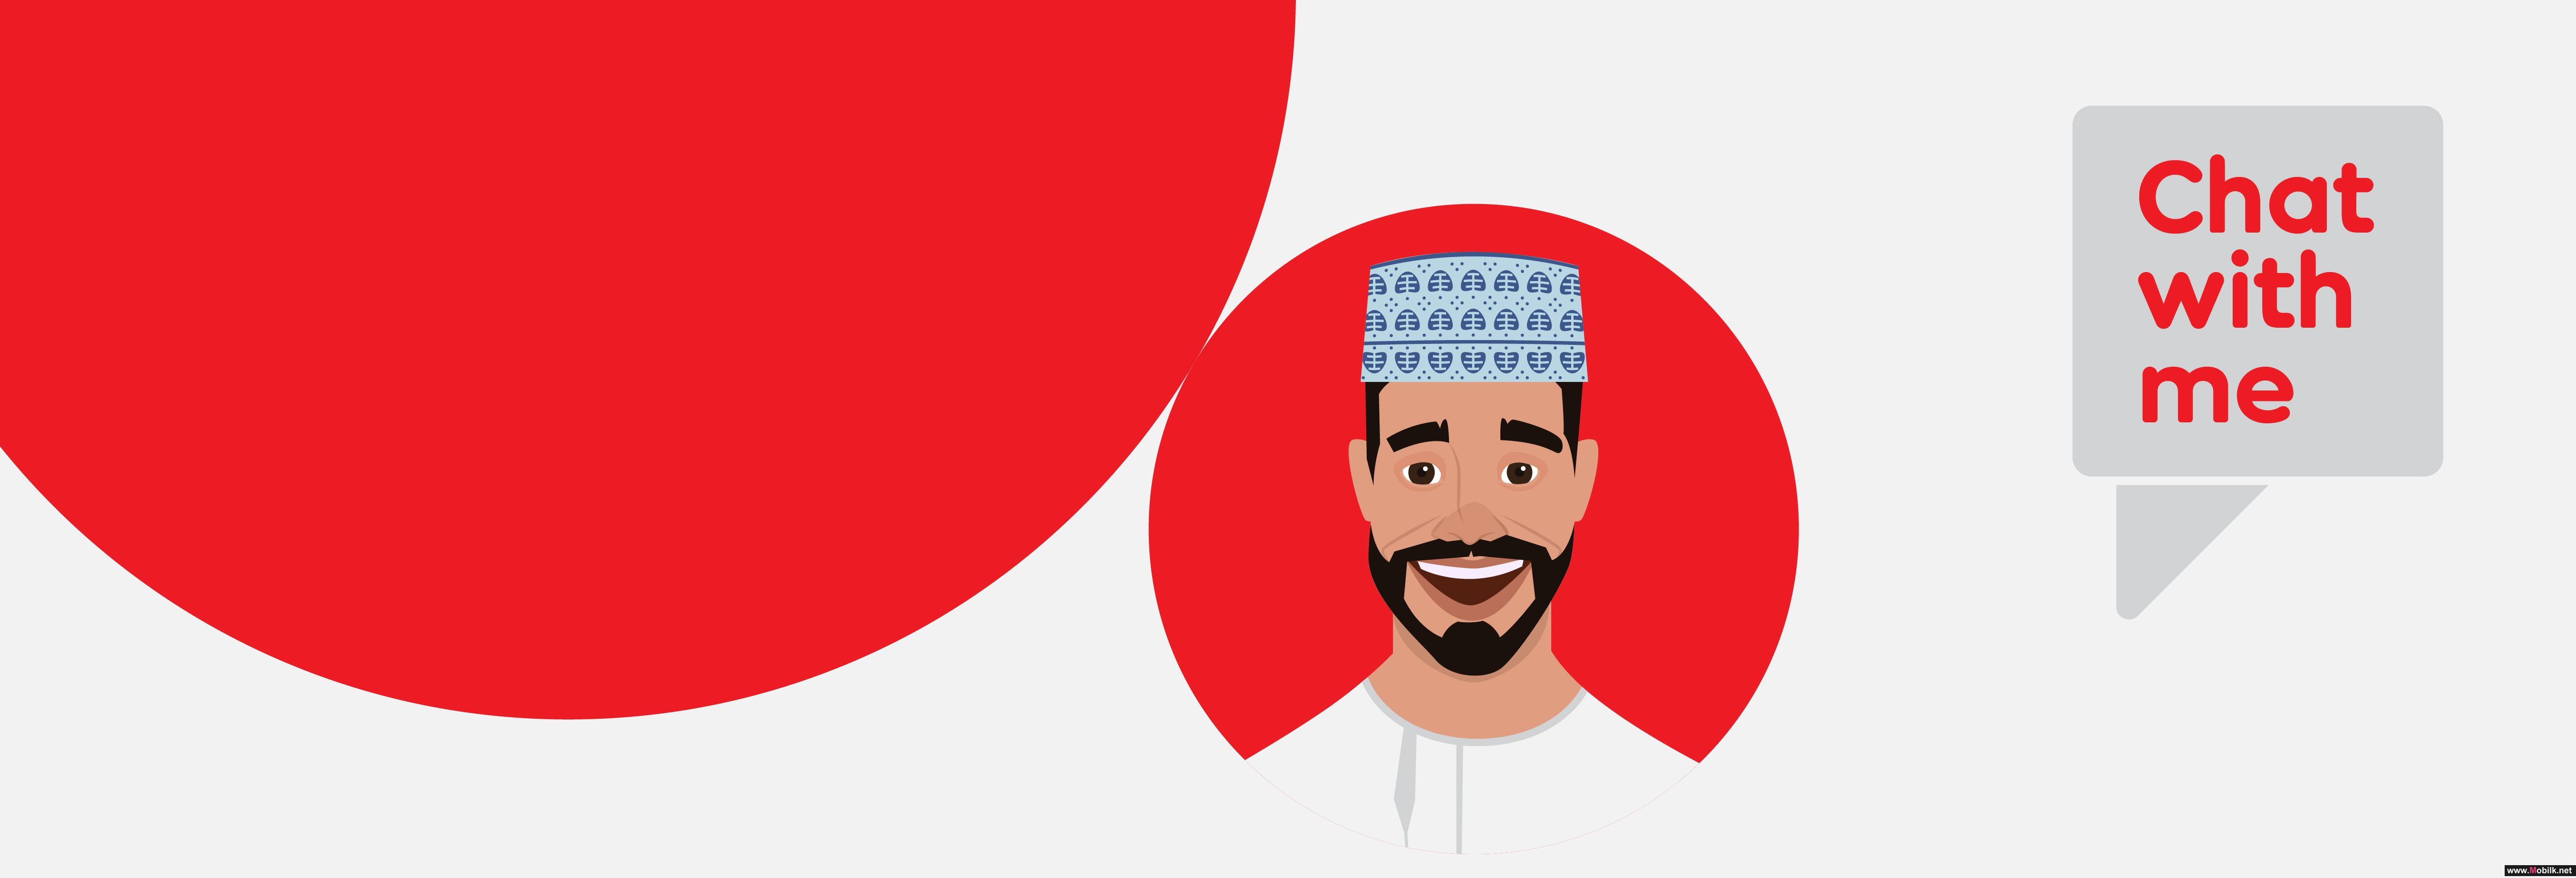 It’s Never been Simpler to join Ooredoo with New Digital Services